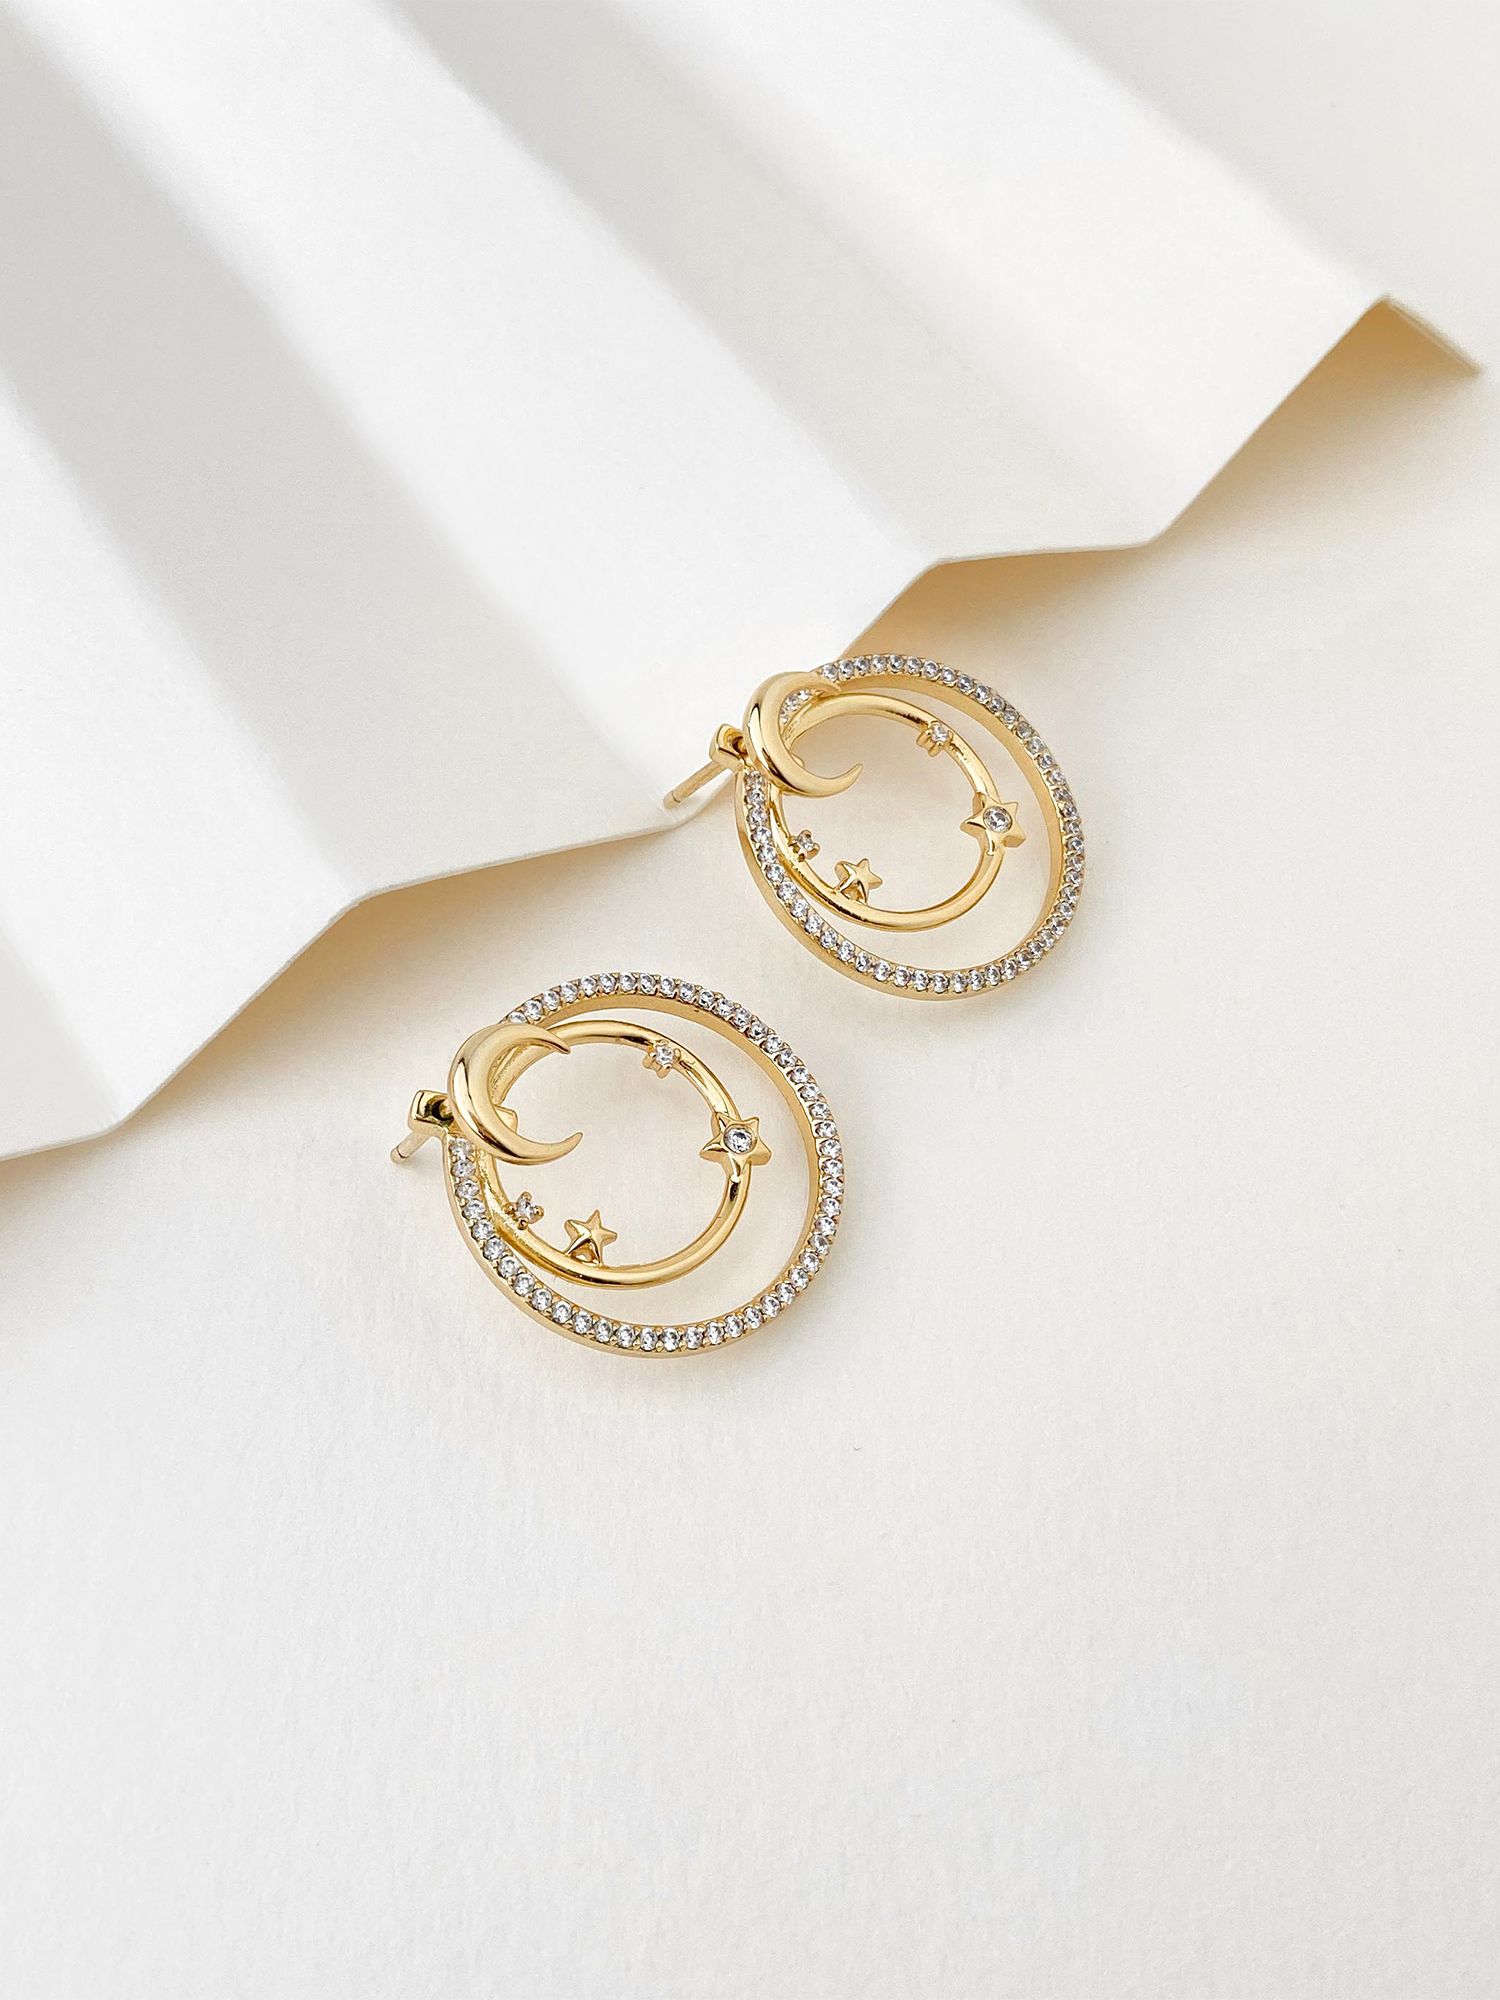 Wanderlust + Co Midnight Hour Earrings, Gold at John Lewis & Partners